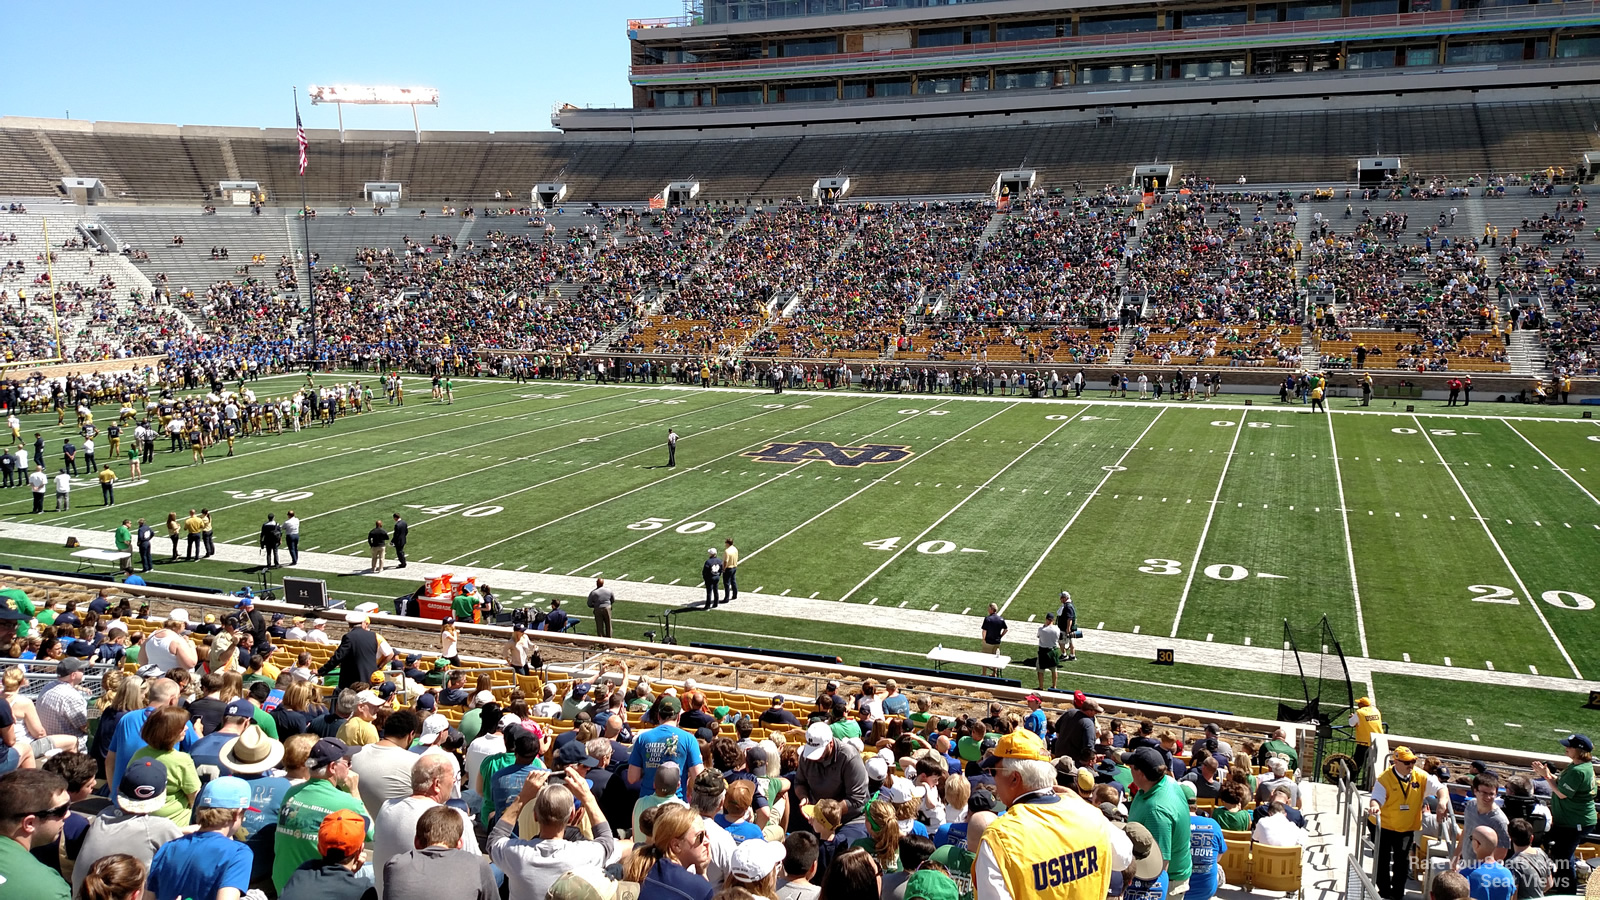 section 26, row 36 seat view  - notre dame stadium